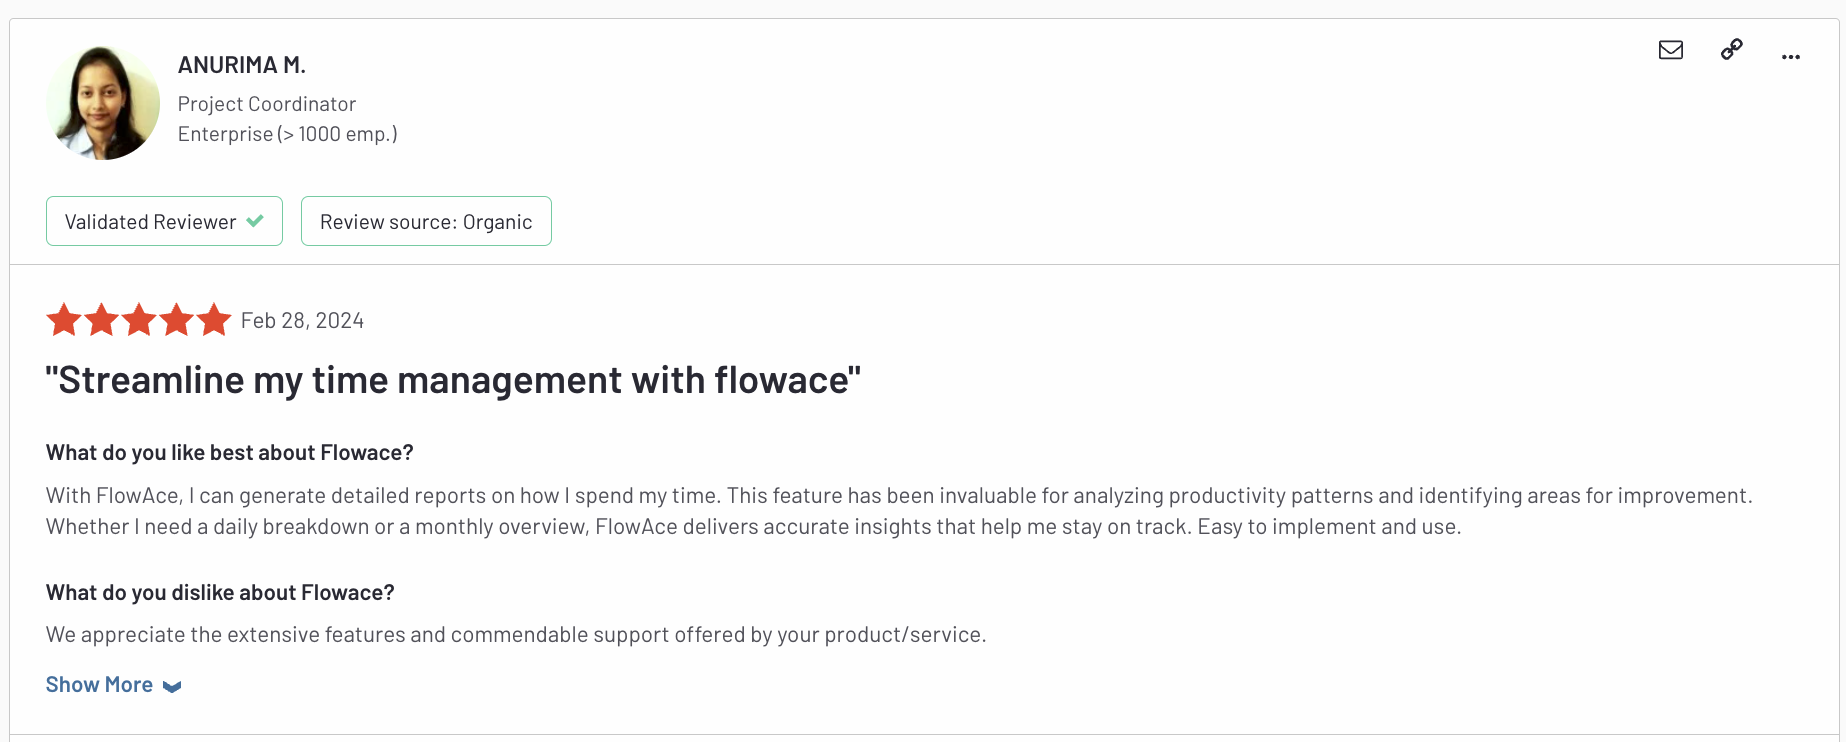 Streamline my time management with flowace